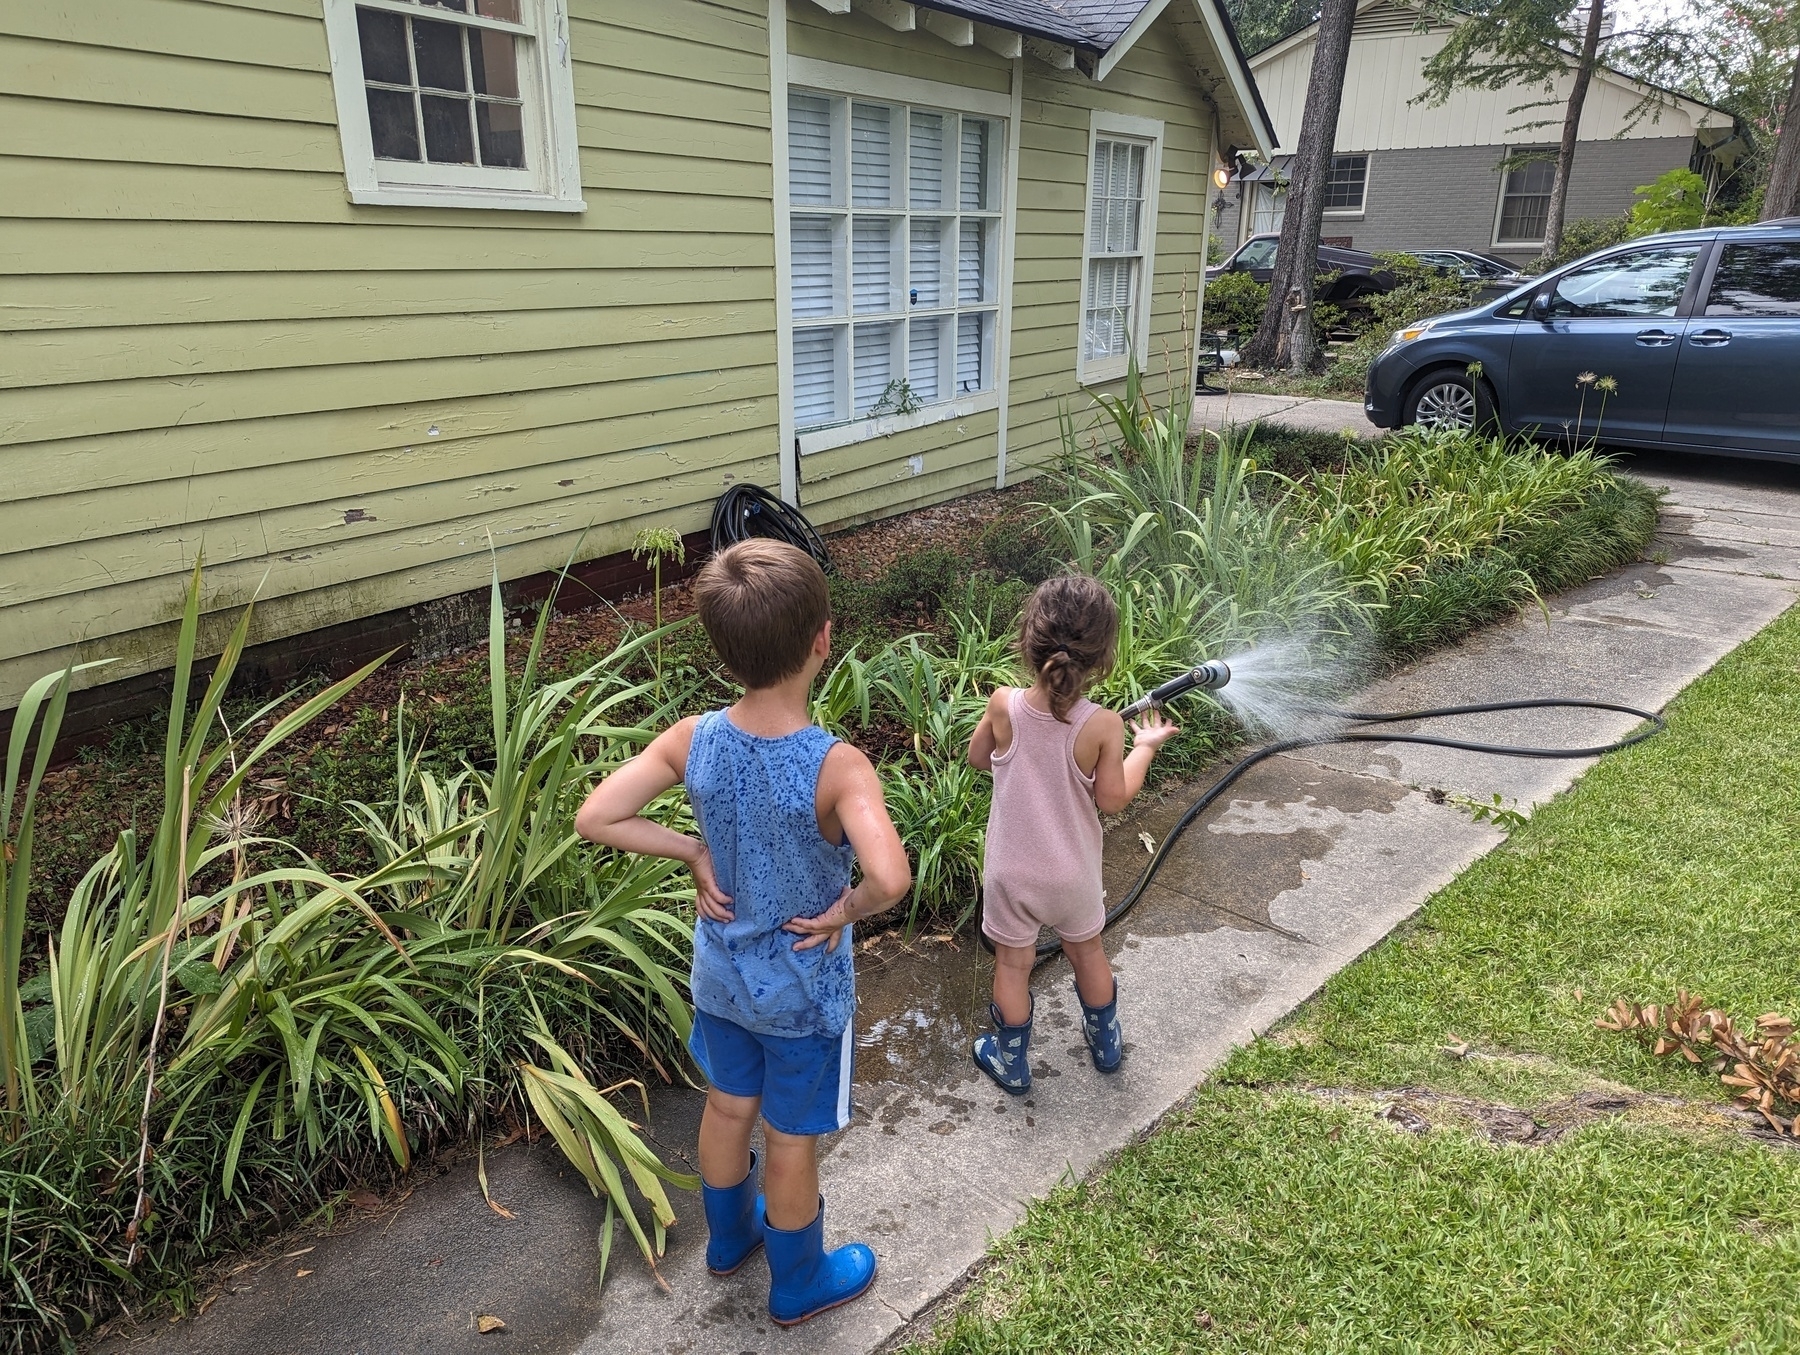 Tow children, a boy or five years and a girl of four years, in blue and pink shirts and t-shirts standing in front of a garden bed with azalea shrubs and other plants.  The girl is holding a hose.